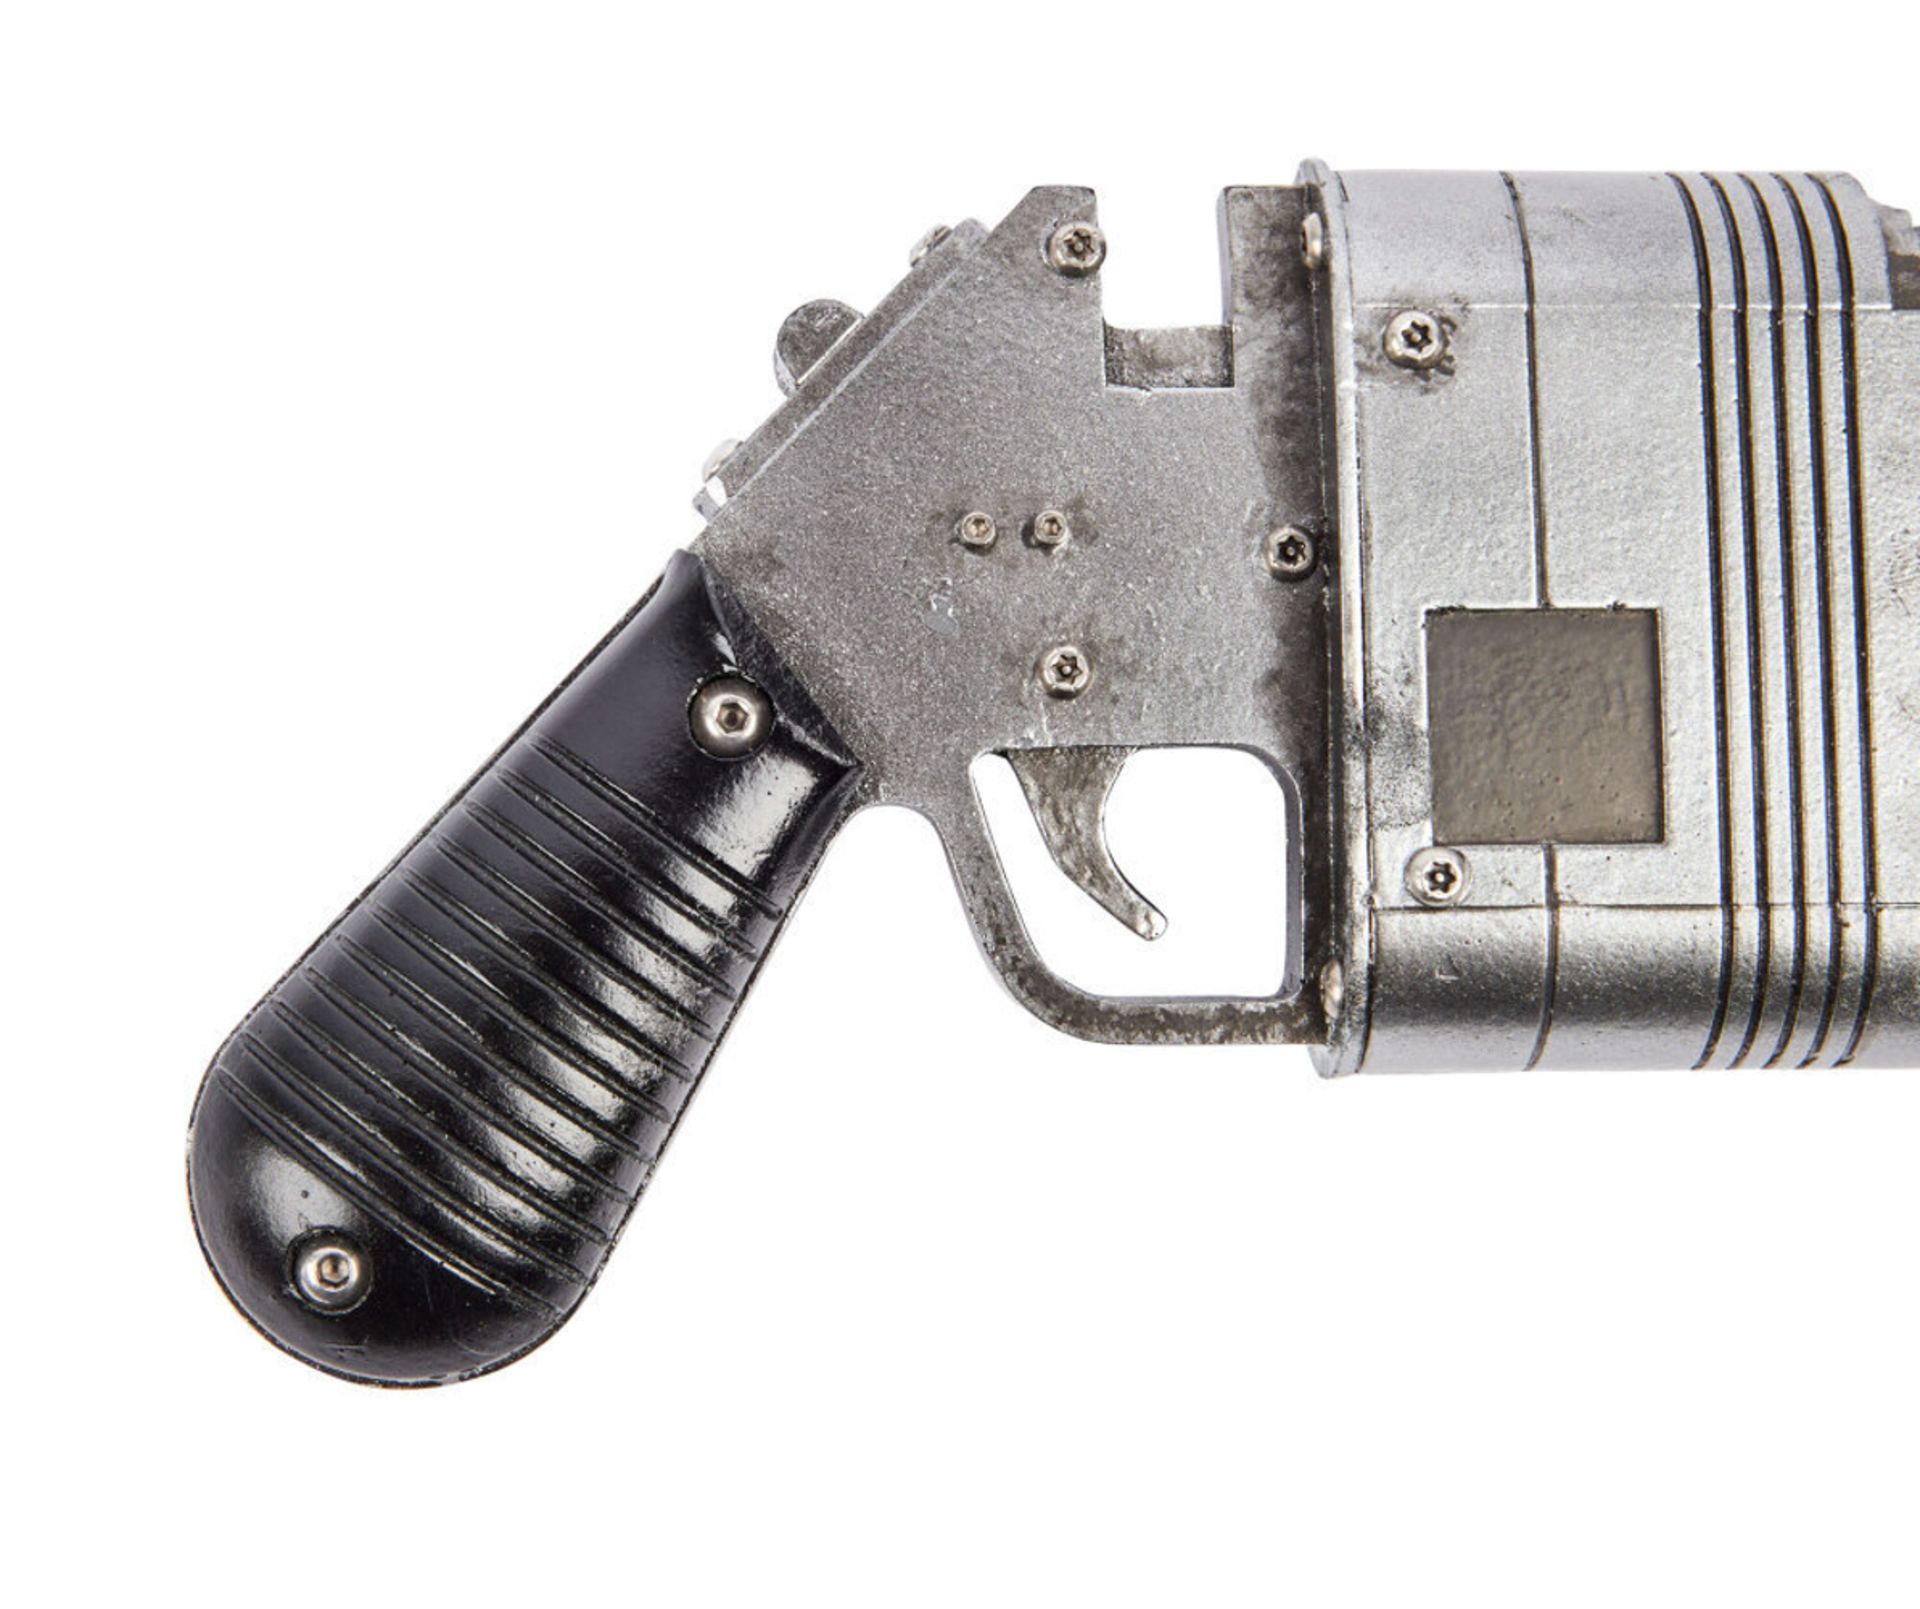 STAR WARS - THE FORCE AWAKENS | DAISY RIDLEY "REY" NN-14 BLASTER PROP (WITH DVD) - Image 10 of 15